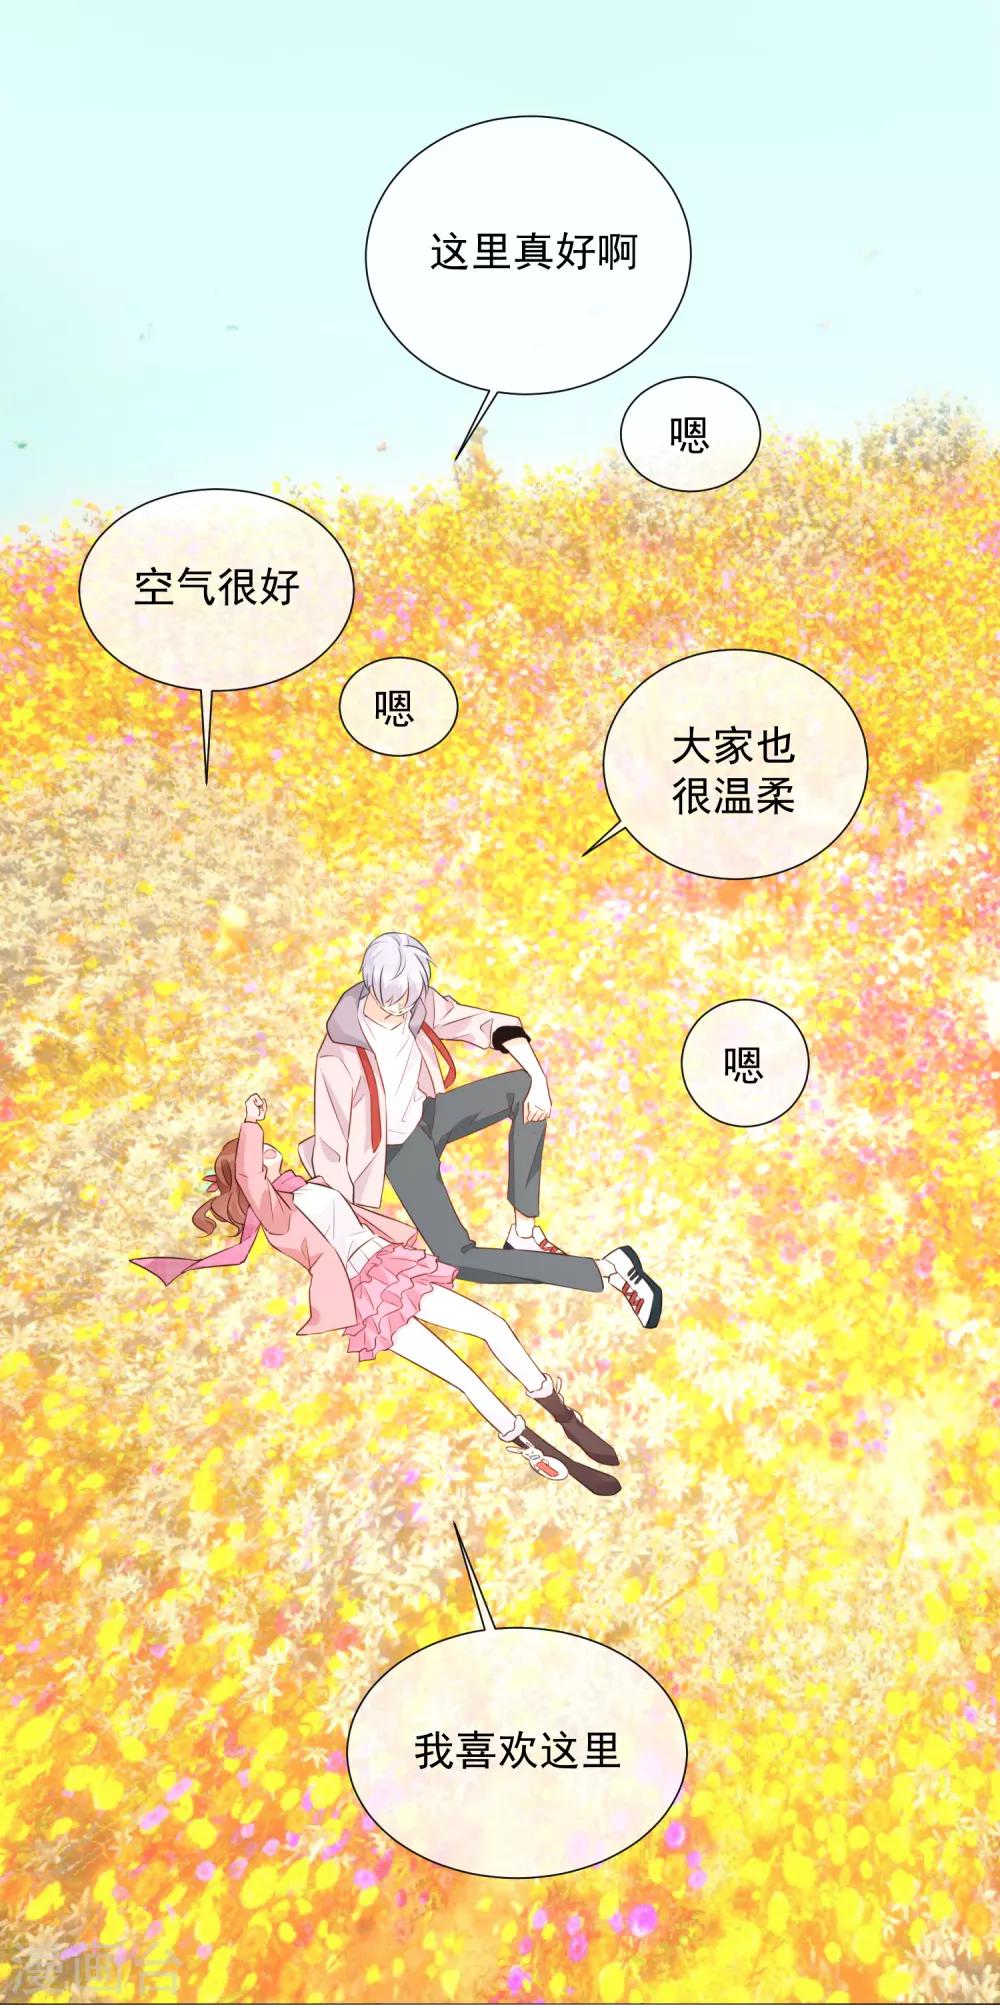 One Kiss A Day - 第86话 夫妻生活 - 5